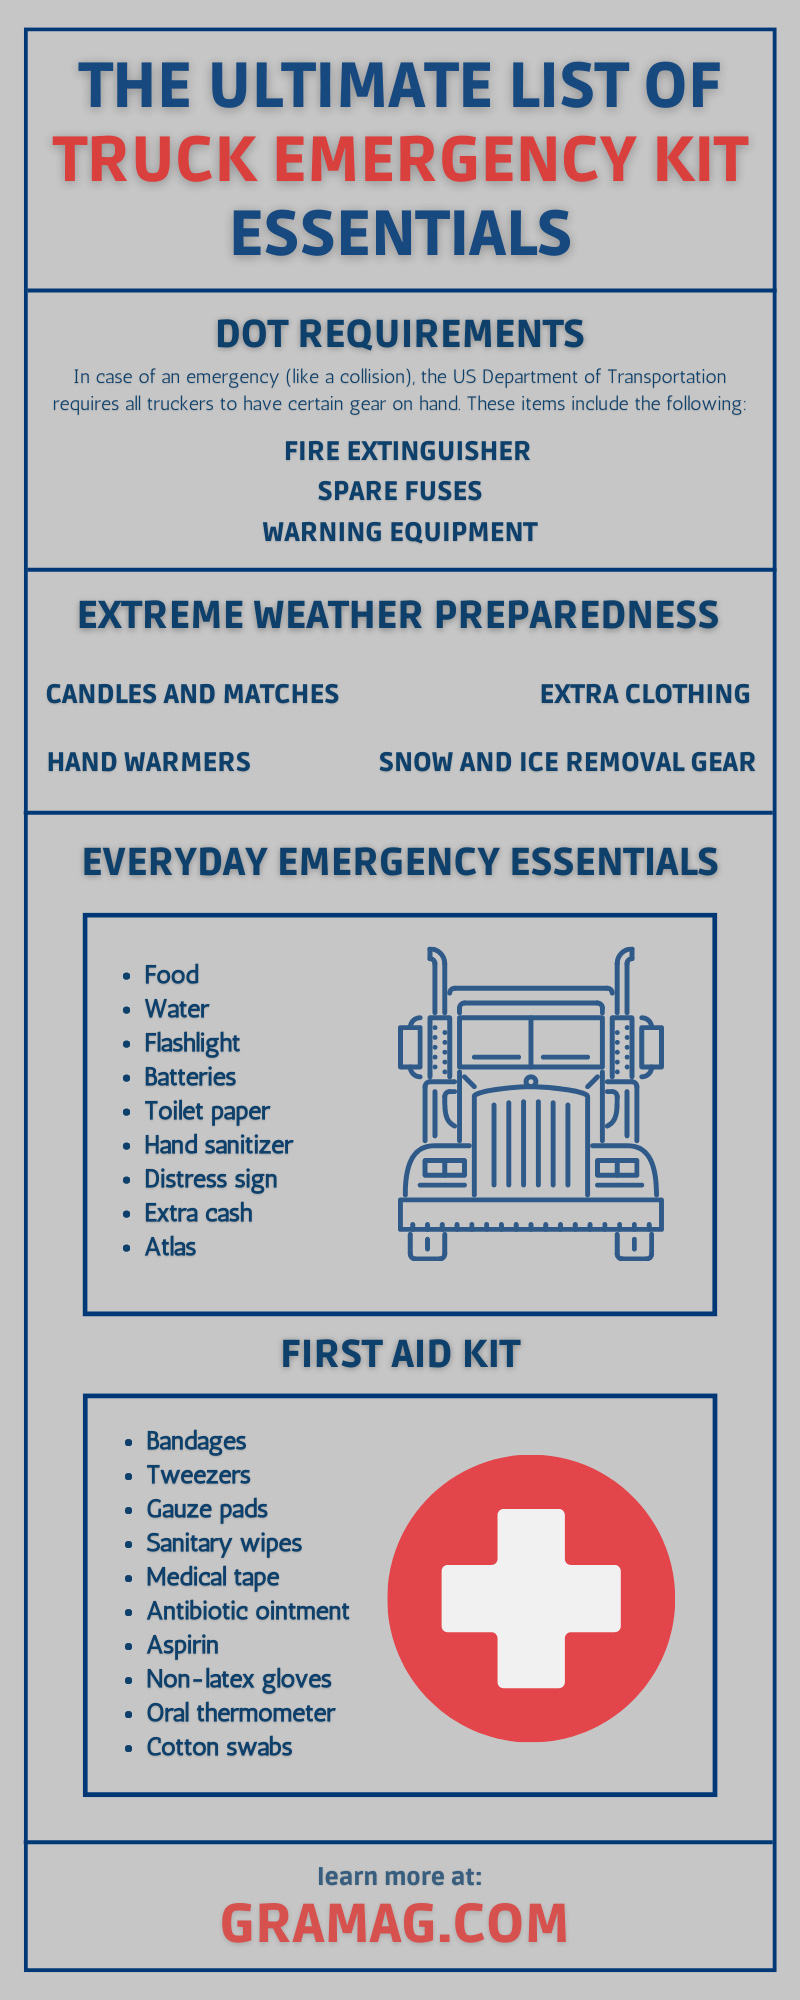 The Ultimate List of Truck Emergency Kit Essentials